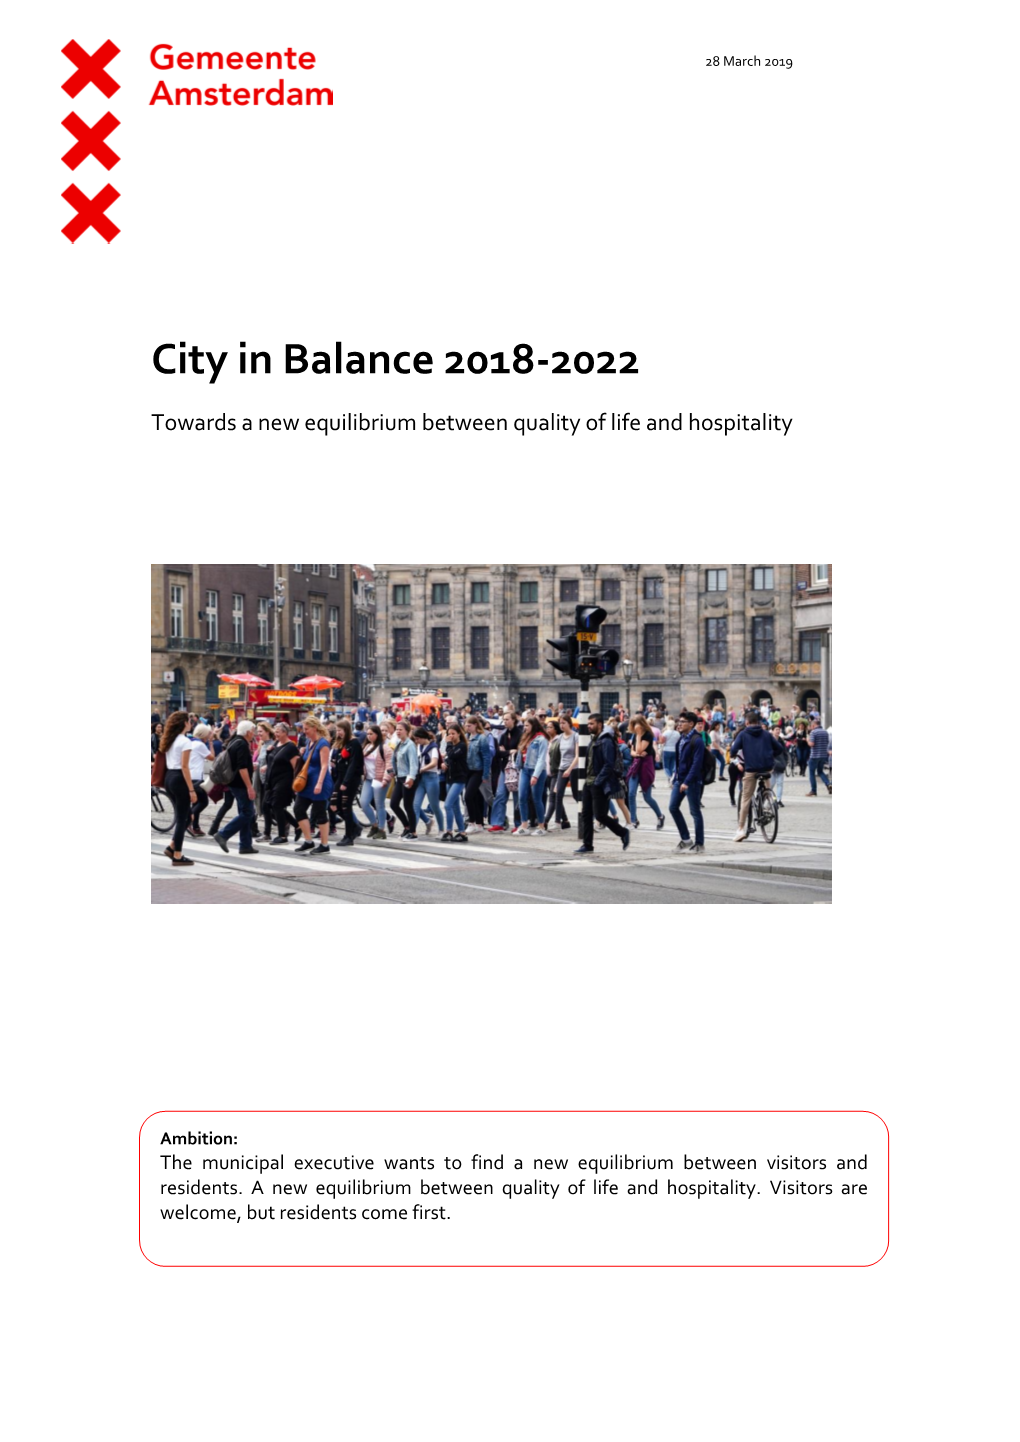 Programme City in Balance 2018-2022